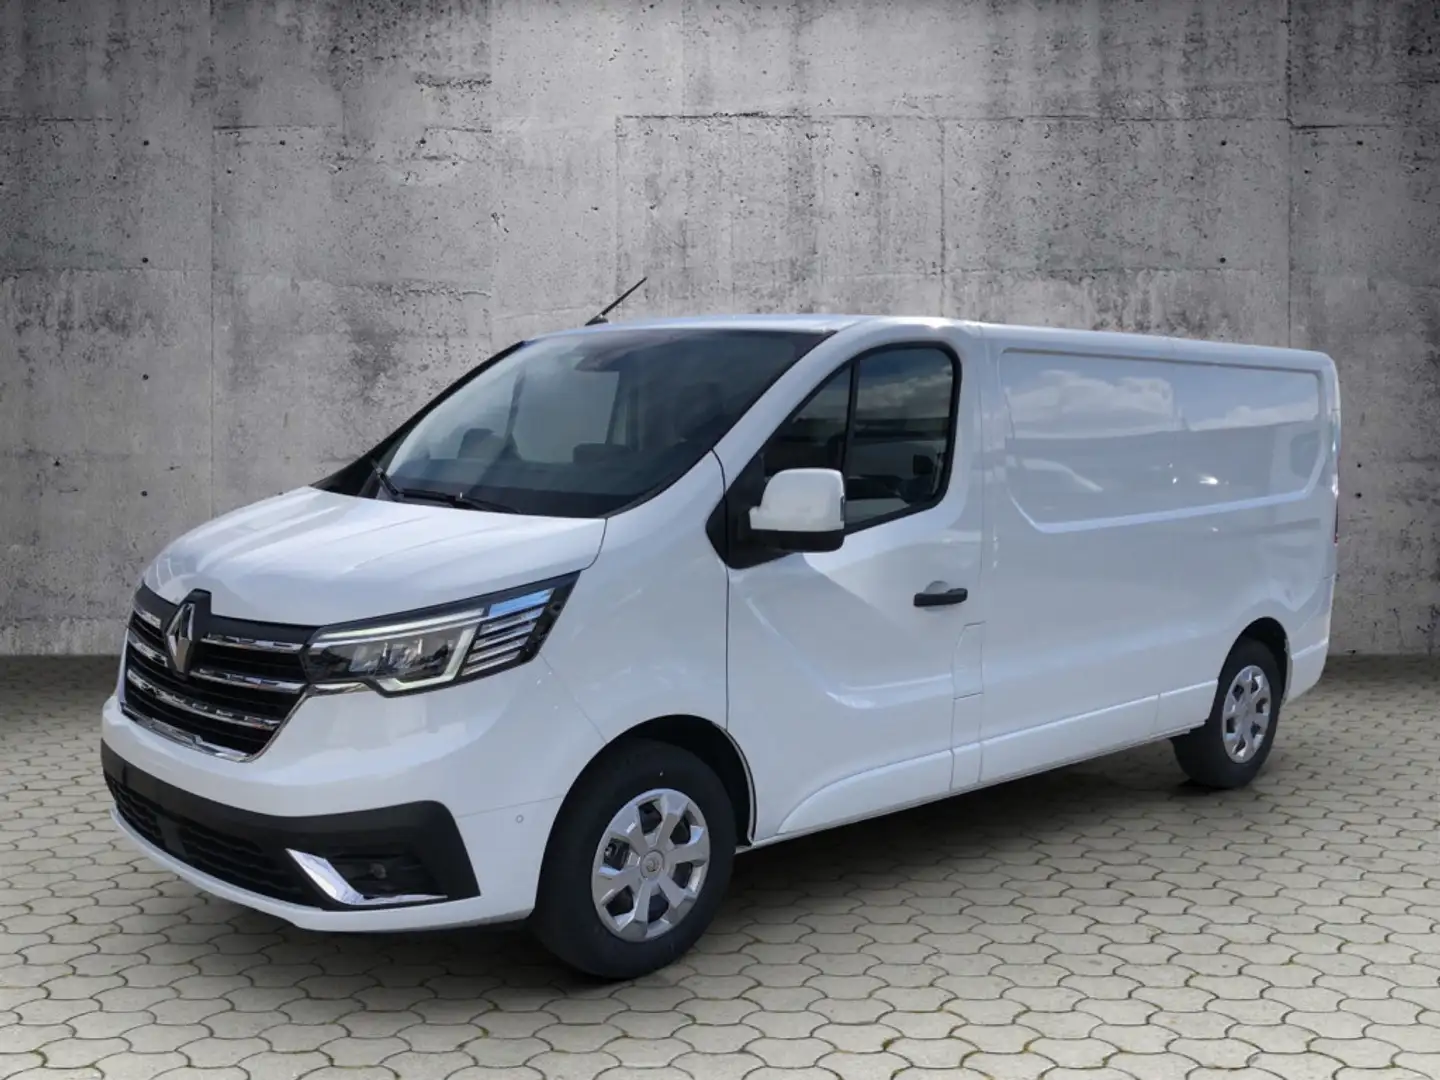 Renault Trafic L2H1 3.0t170 PS Navi, Safety, Klimaauto Alb - 1